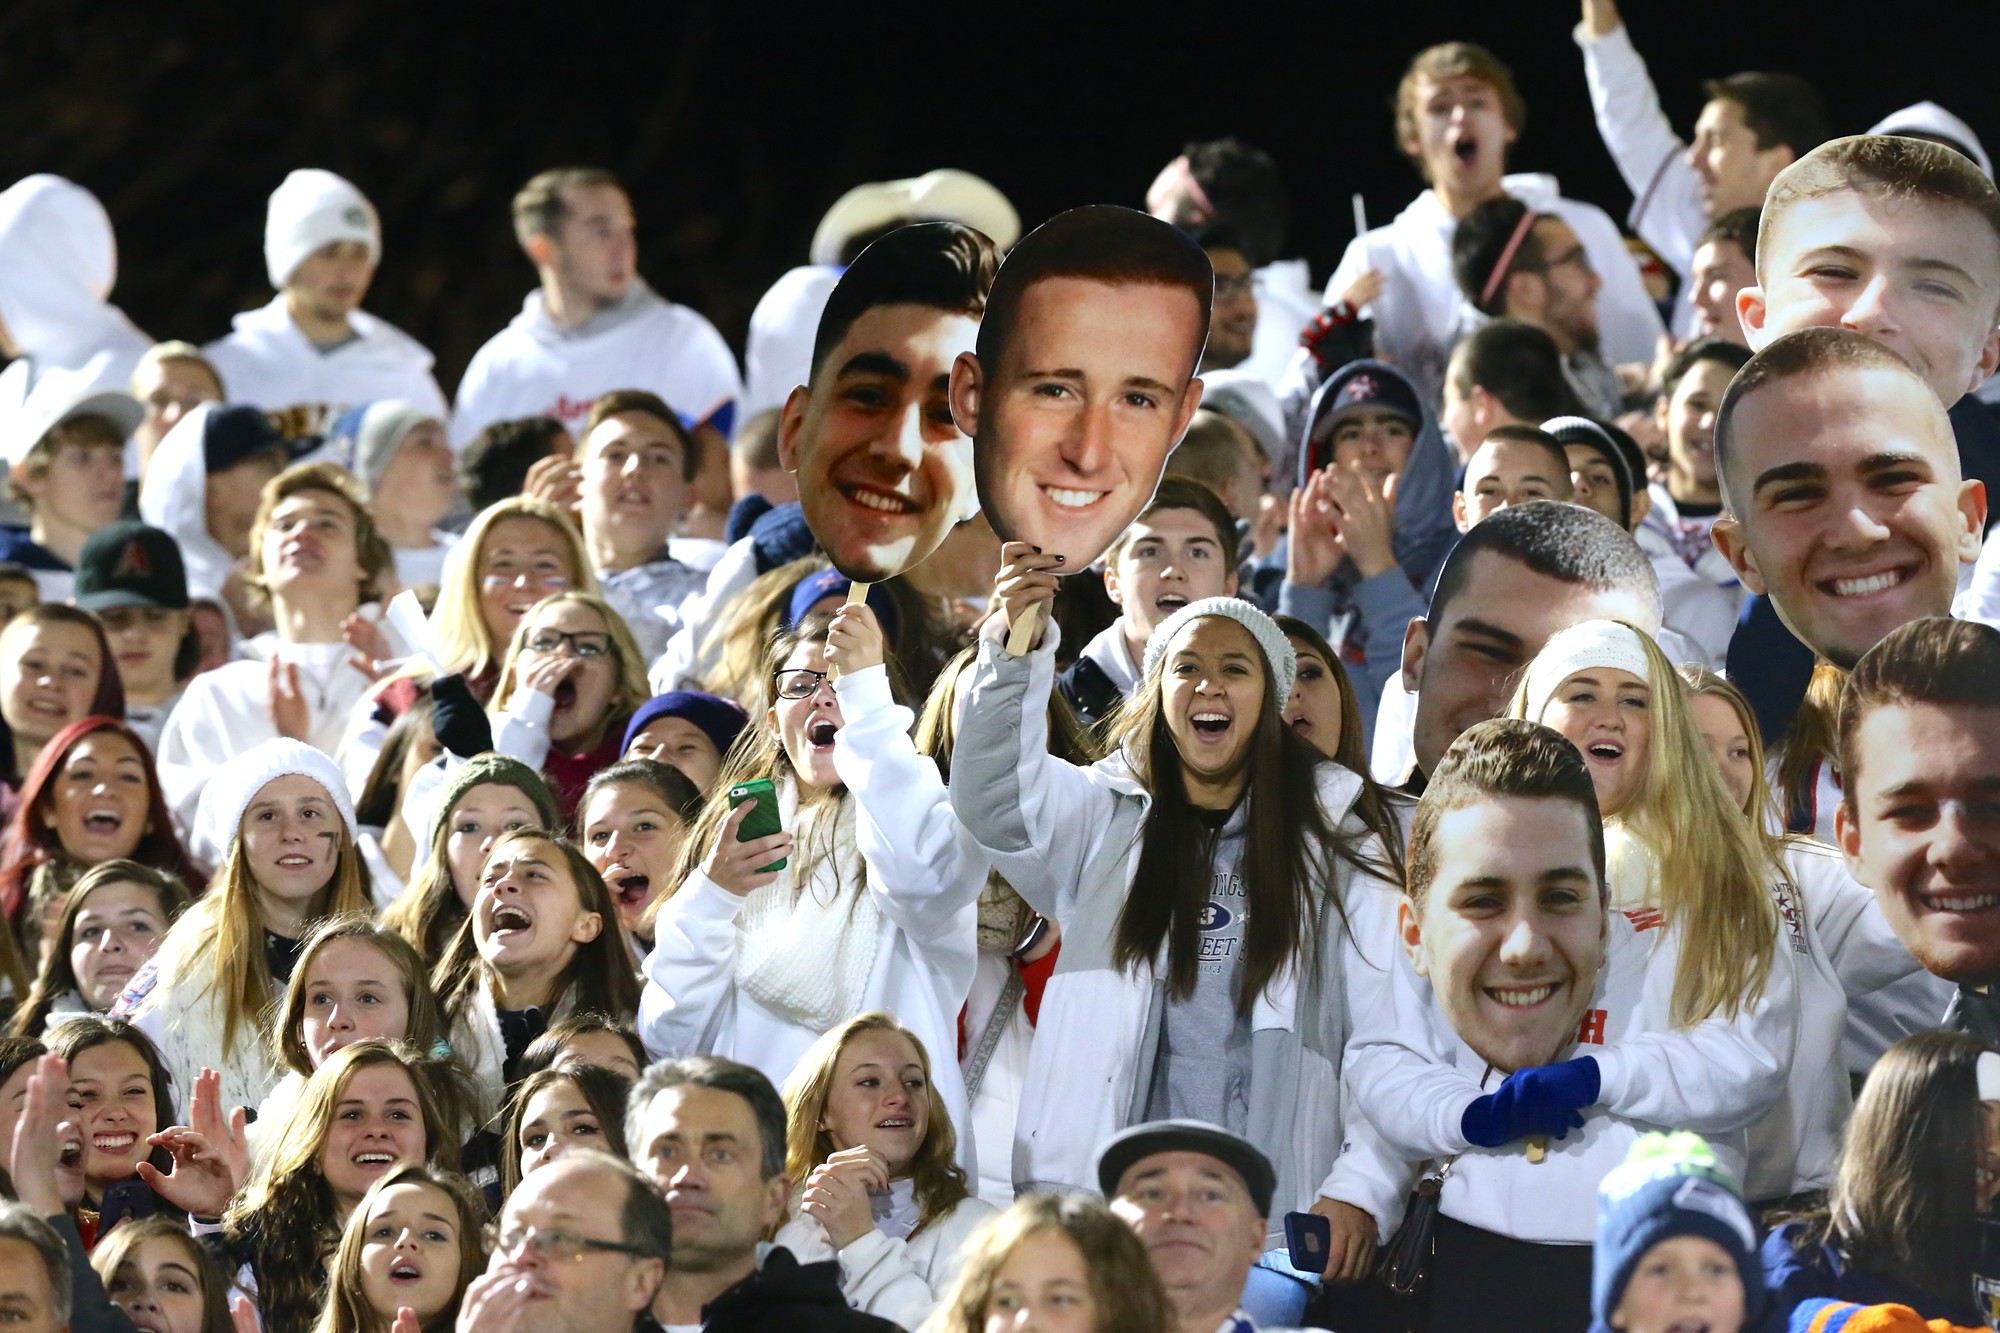 MacArthuR players received great support from the fans who came out to watch the team play Wantagh on Nov. 20 for the Nassau County Conference II title.